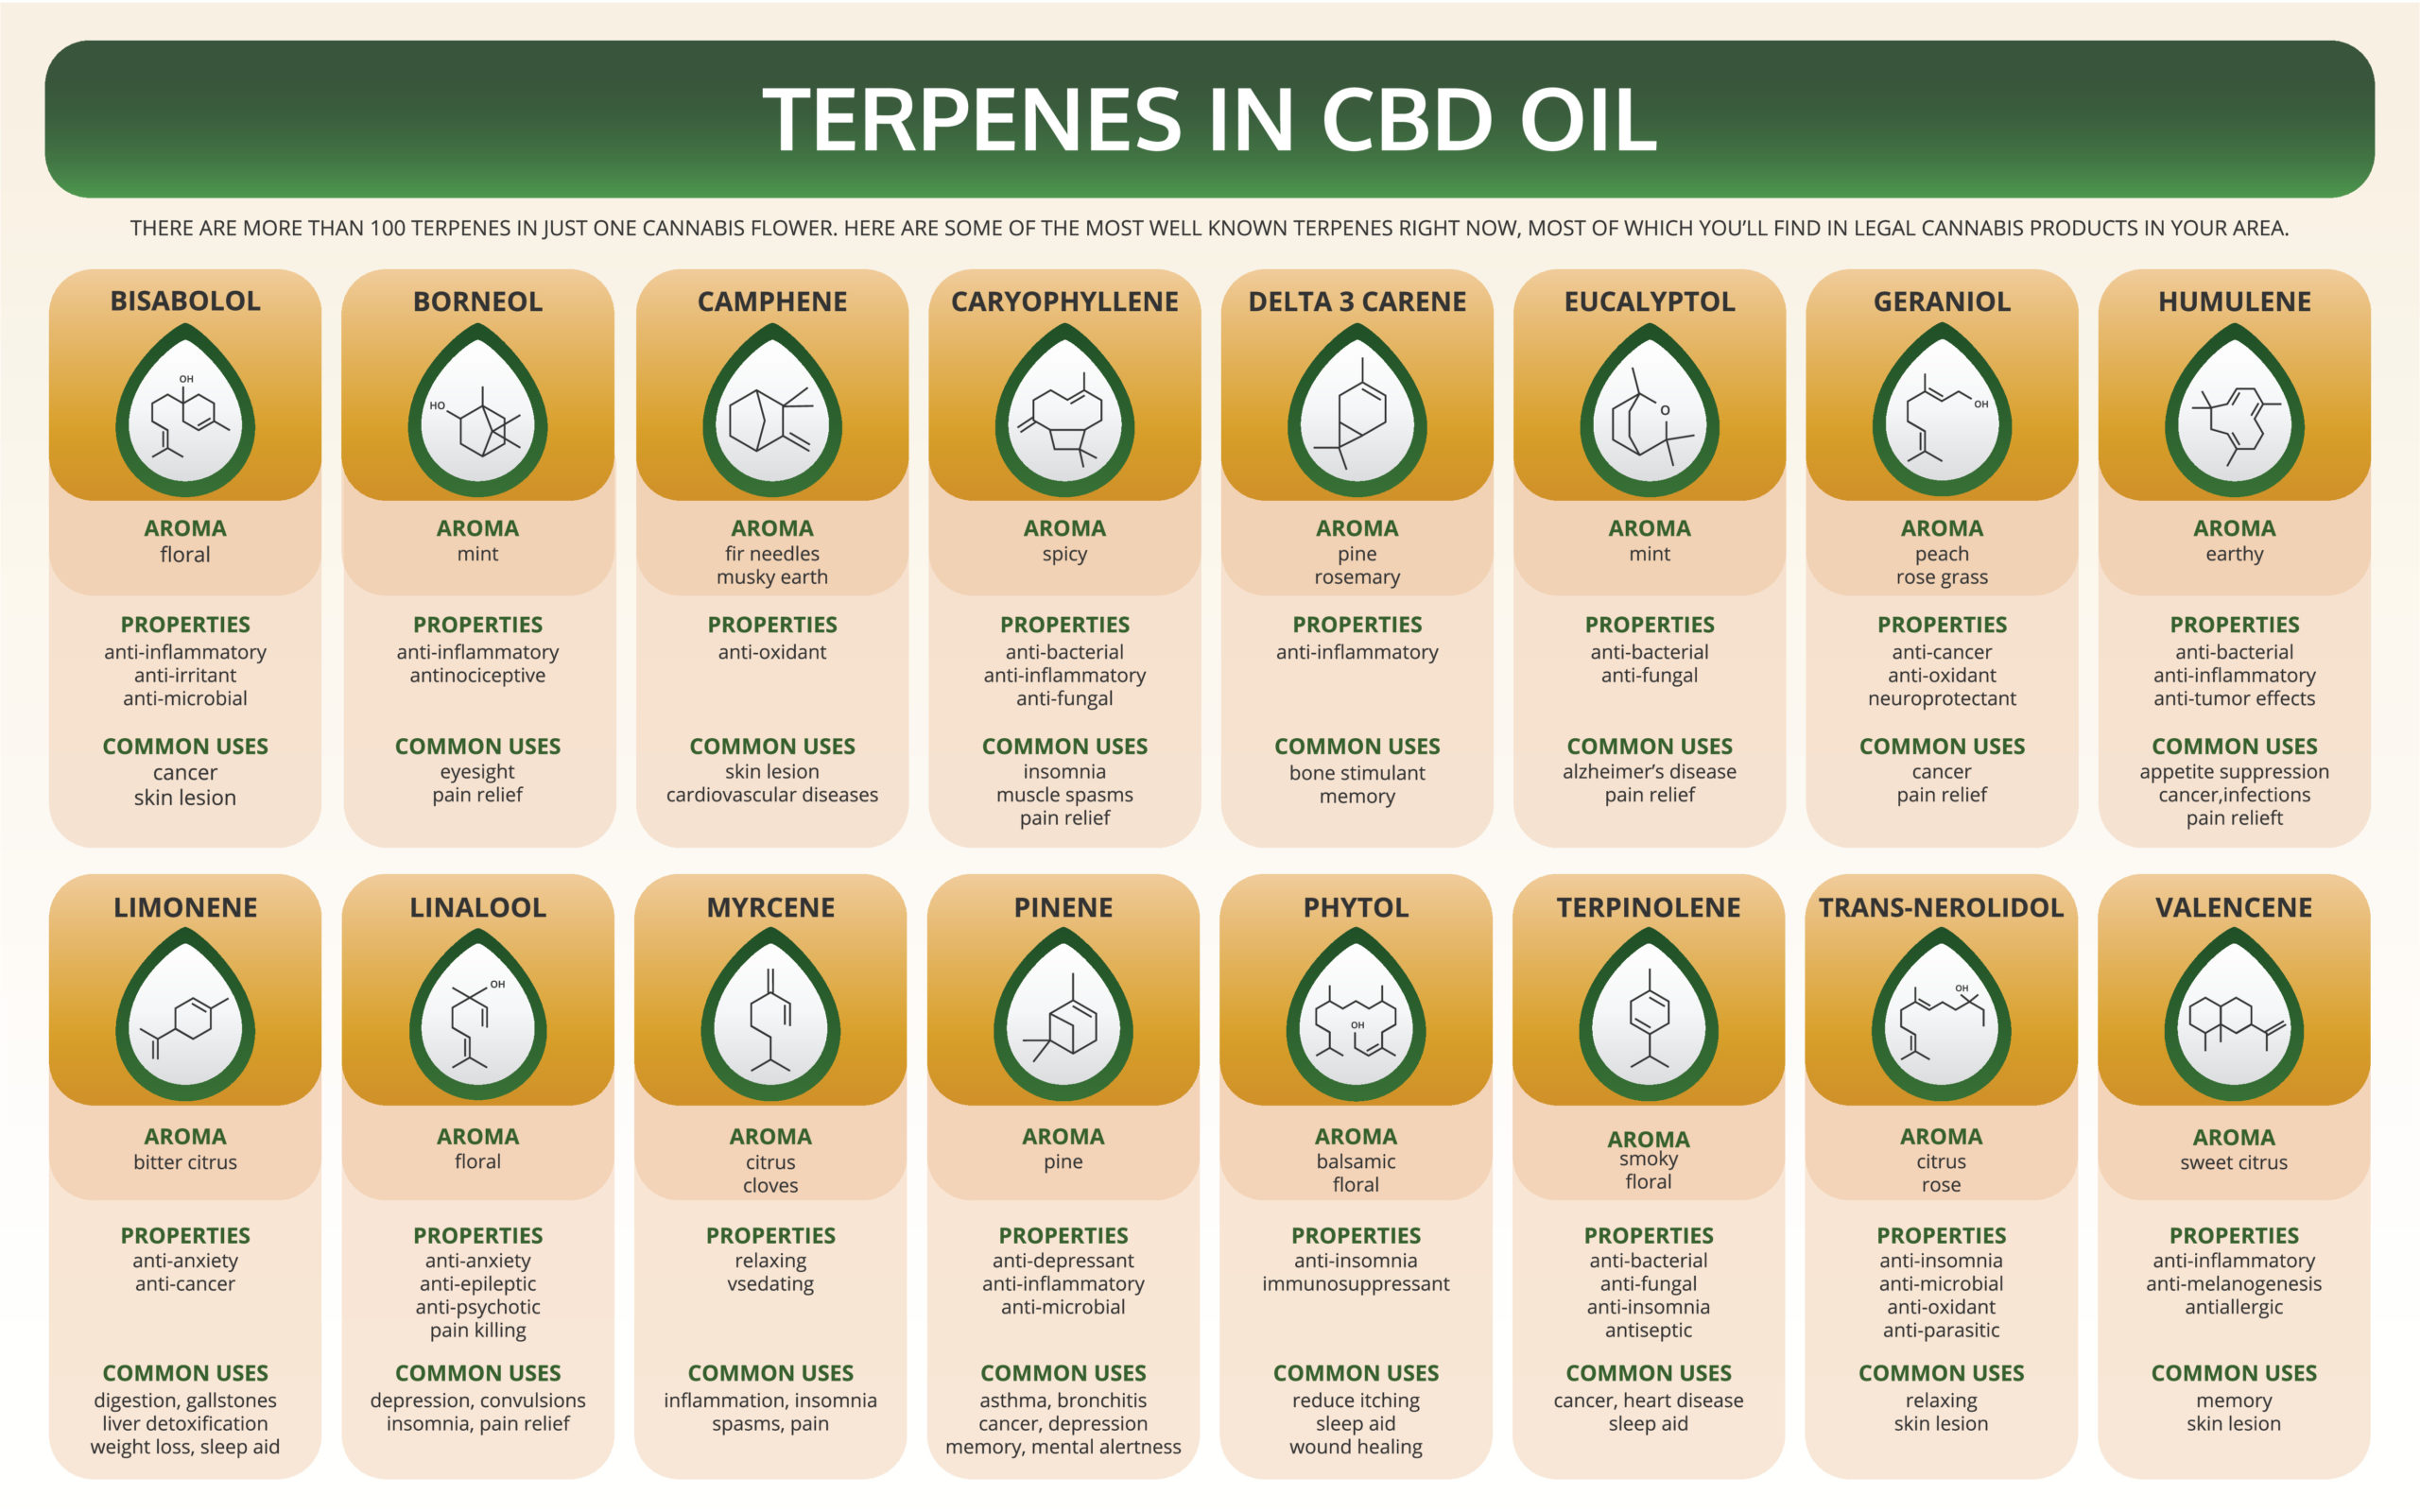 Terpenes in CBD Oil horizontal textbook infographic illustration about cannabis as herbal alternative medicine and chemical therapy, healthcare and medical science vector.